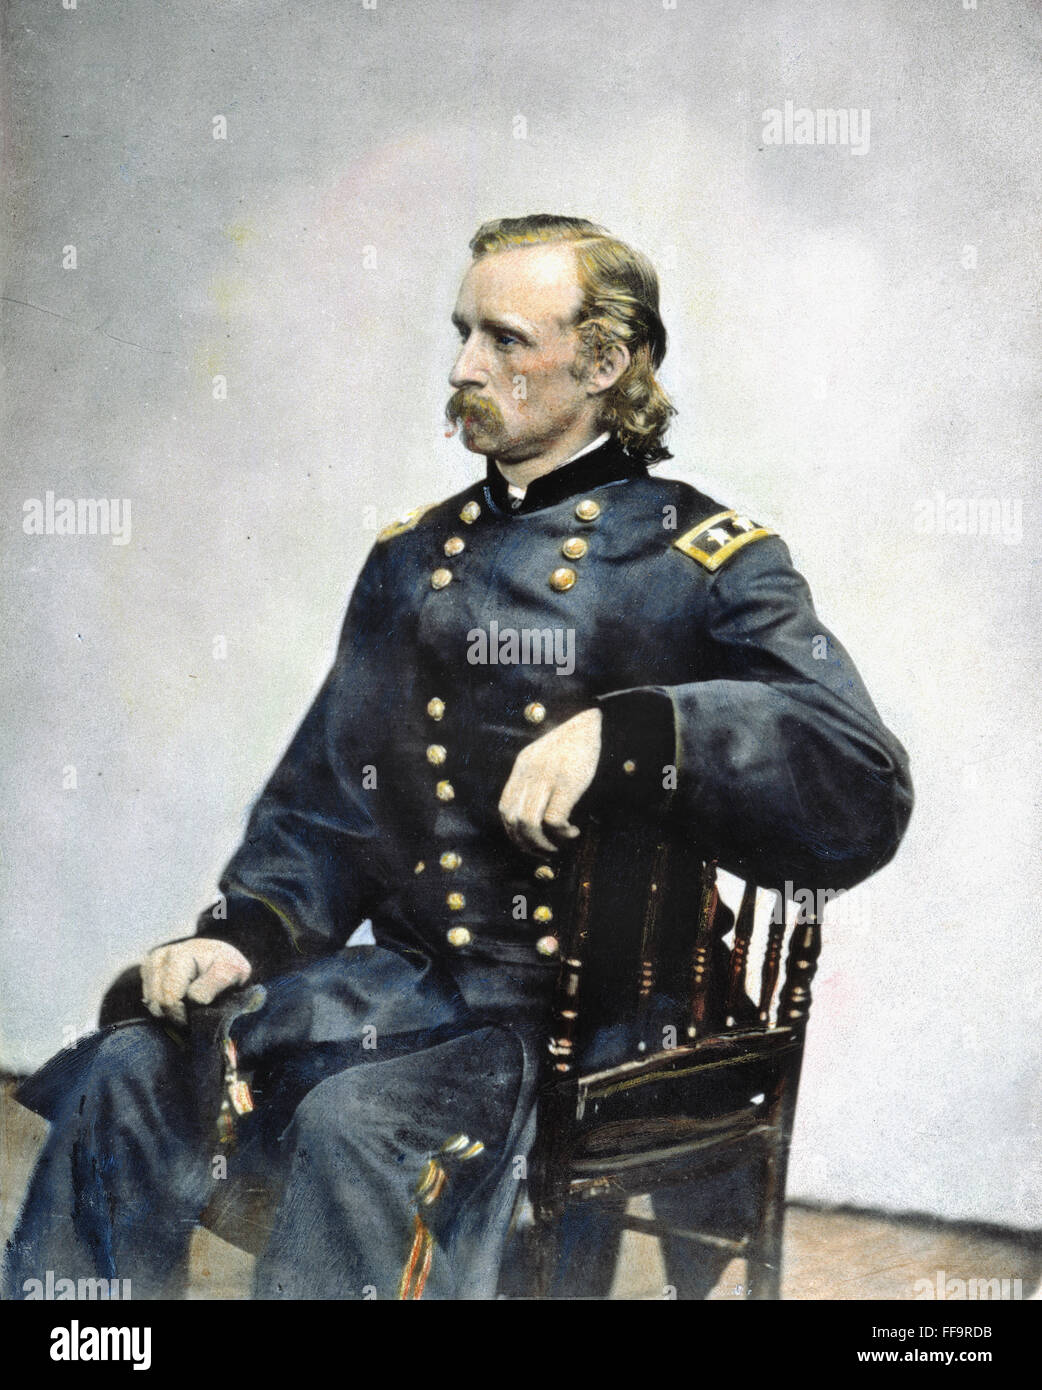 GEORGE ARMSTRONG CUSTER /n(1839-1876). American army officer. Oil over a photograph, 1865, by Mathew Brady. Stock Photo